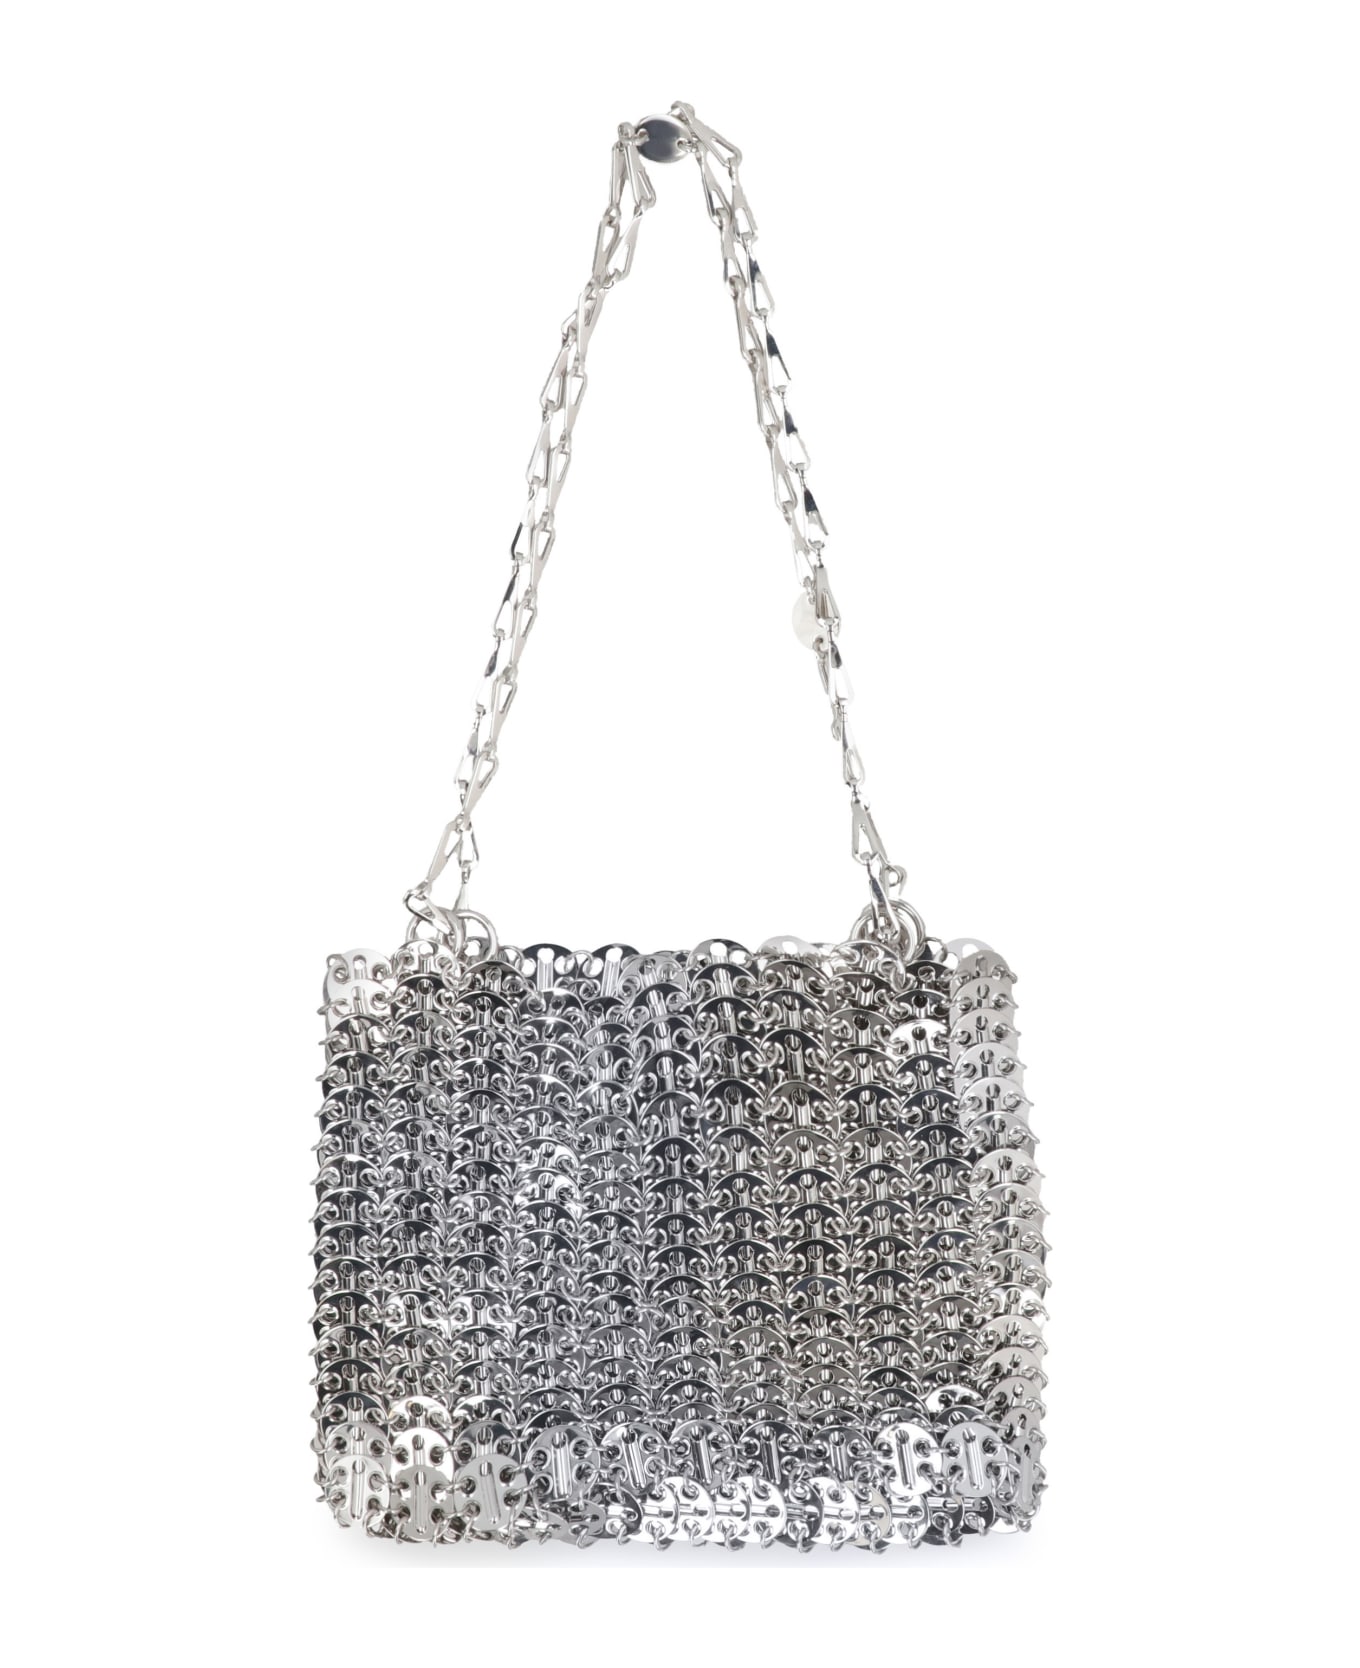 Paco Rabanne Iconic 1969 Bag - Silver